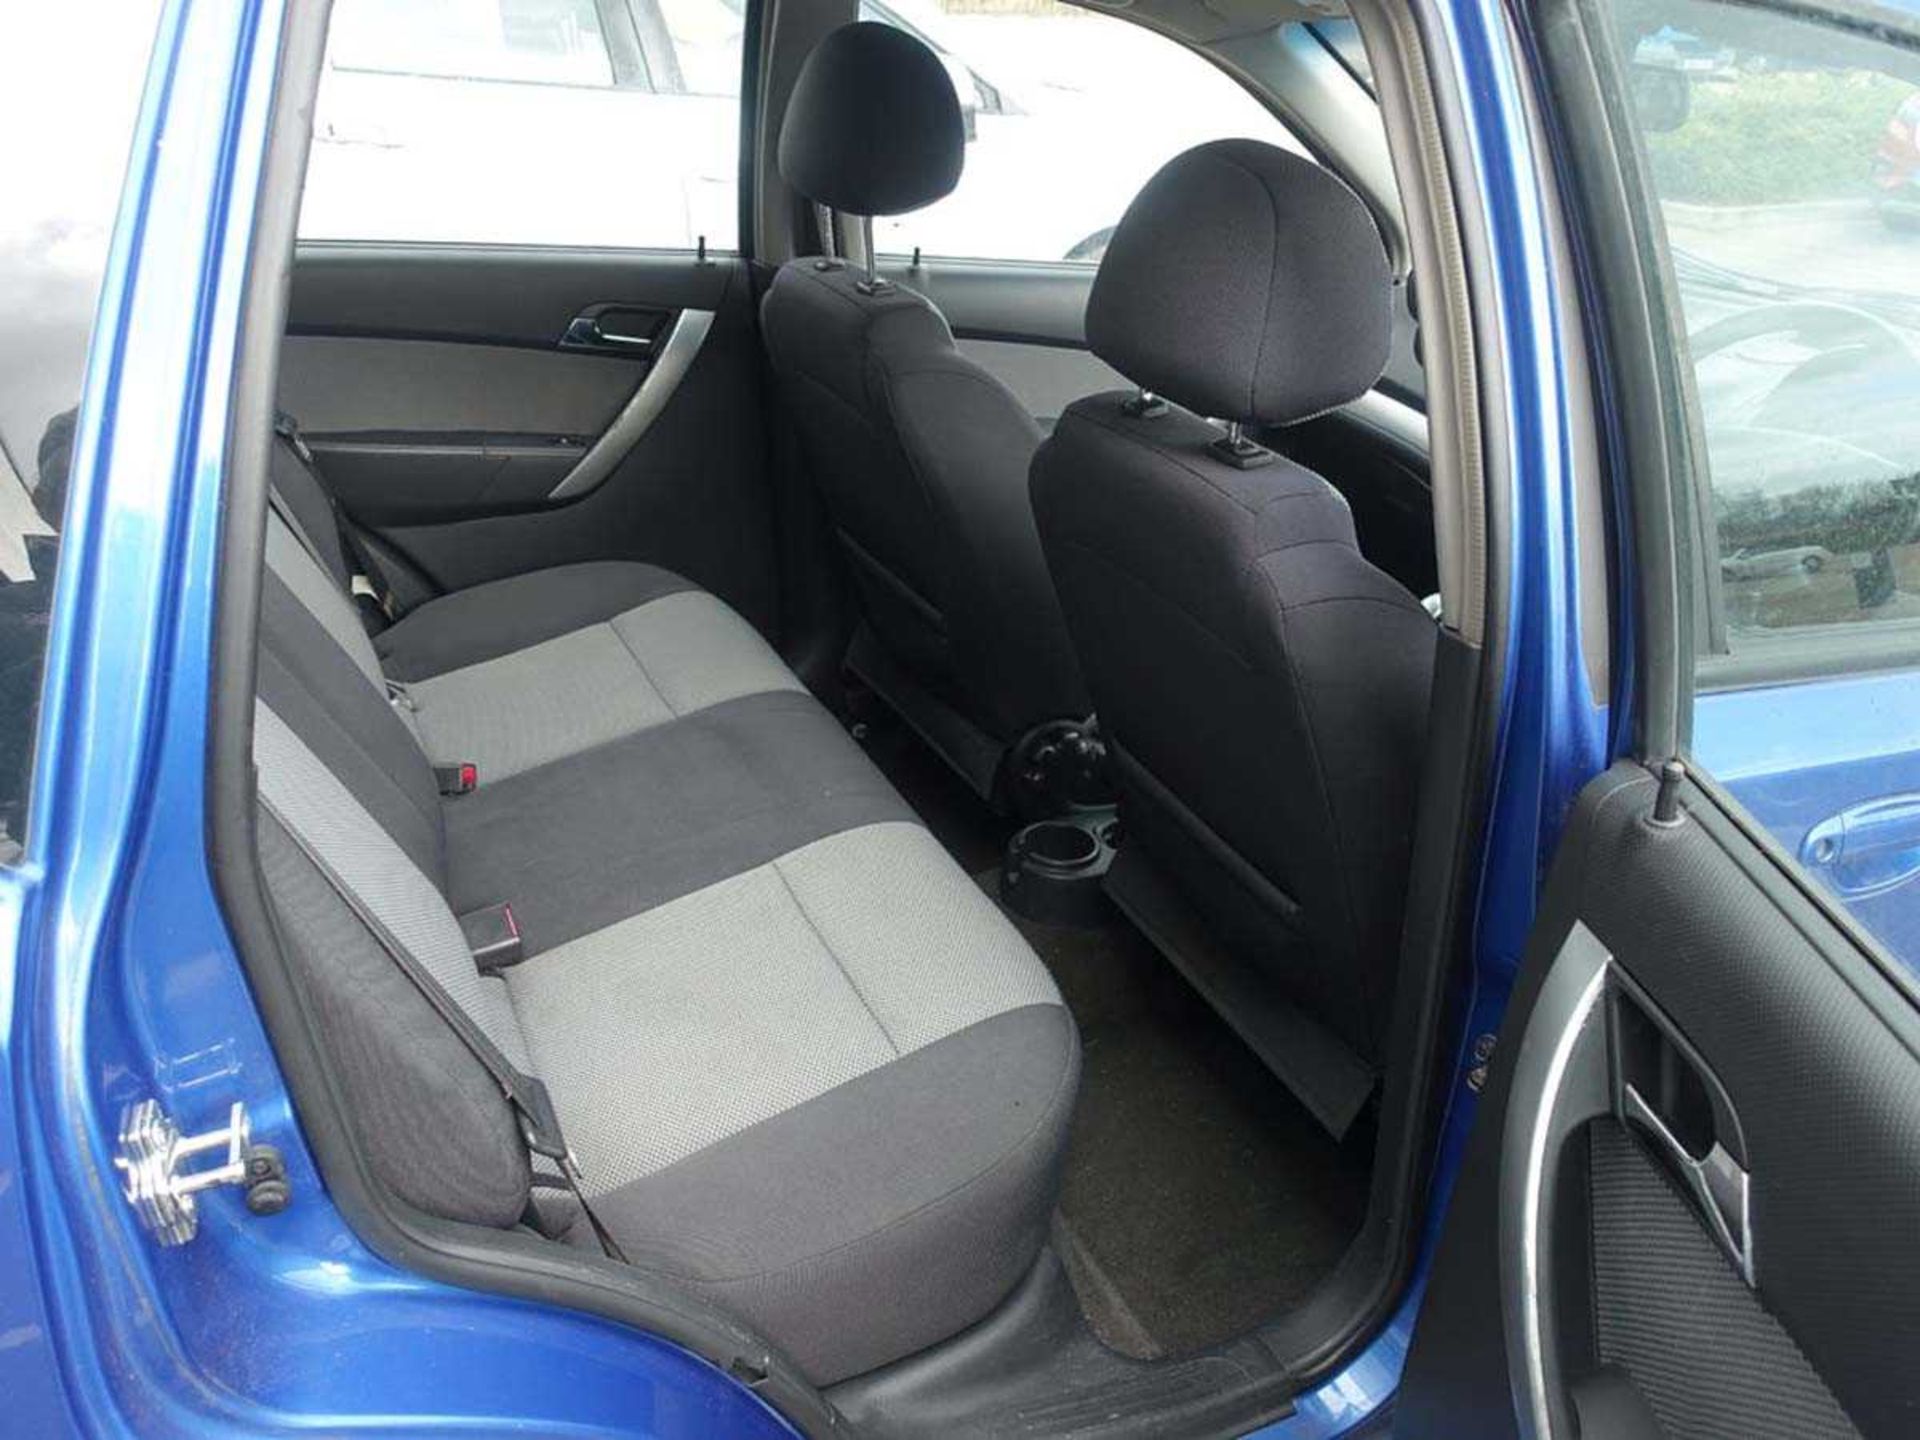 LR59 0PF (2009) Chevrolet Aveo LT Auto in blue, 5 door hatchback, petrol, 1399cc, V5 and two keys, 4 - Image 5 of 10